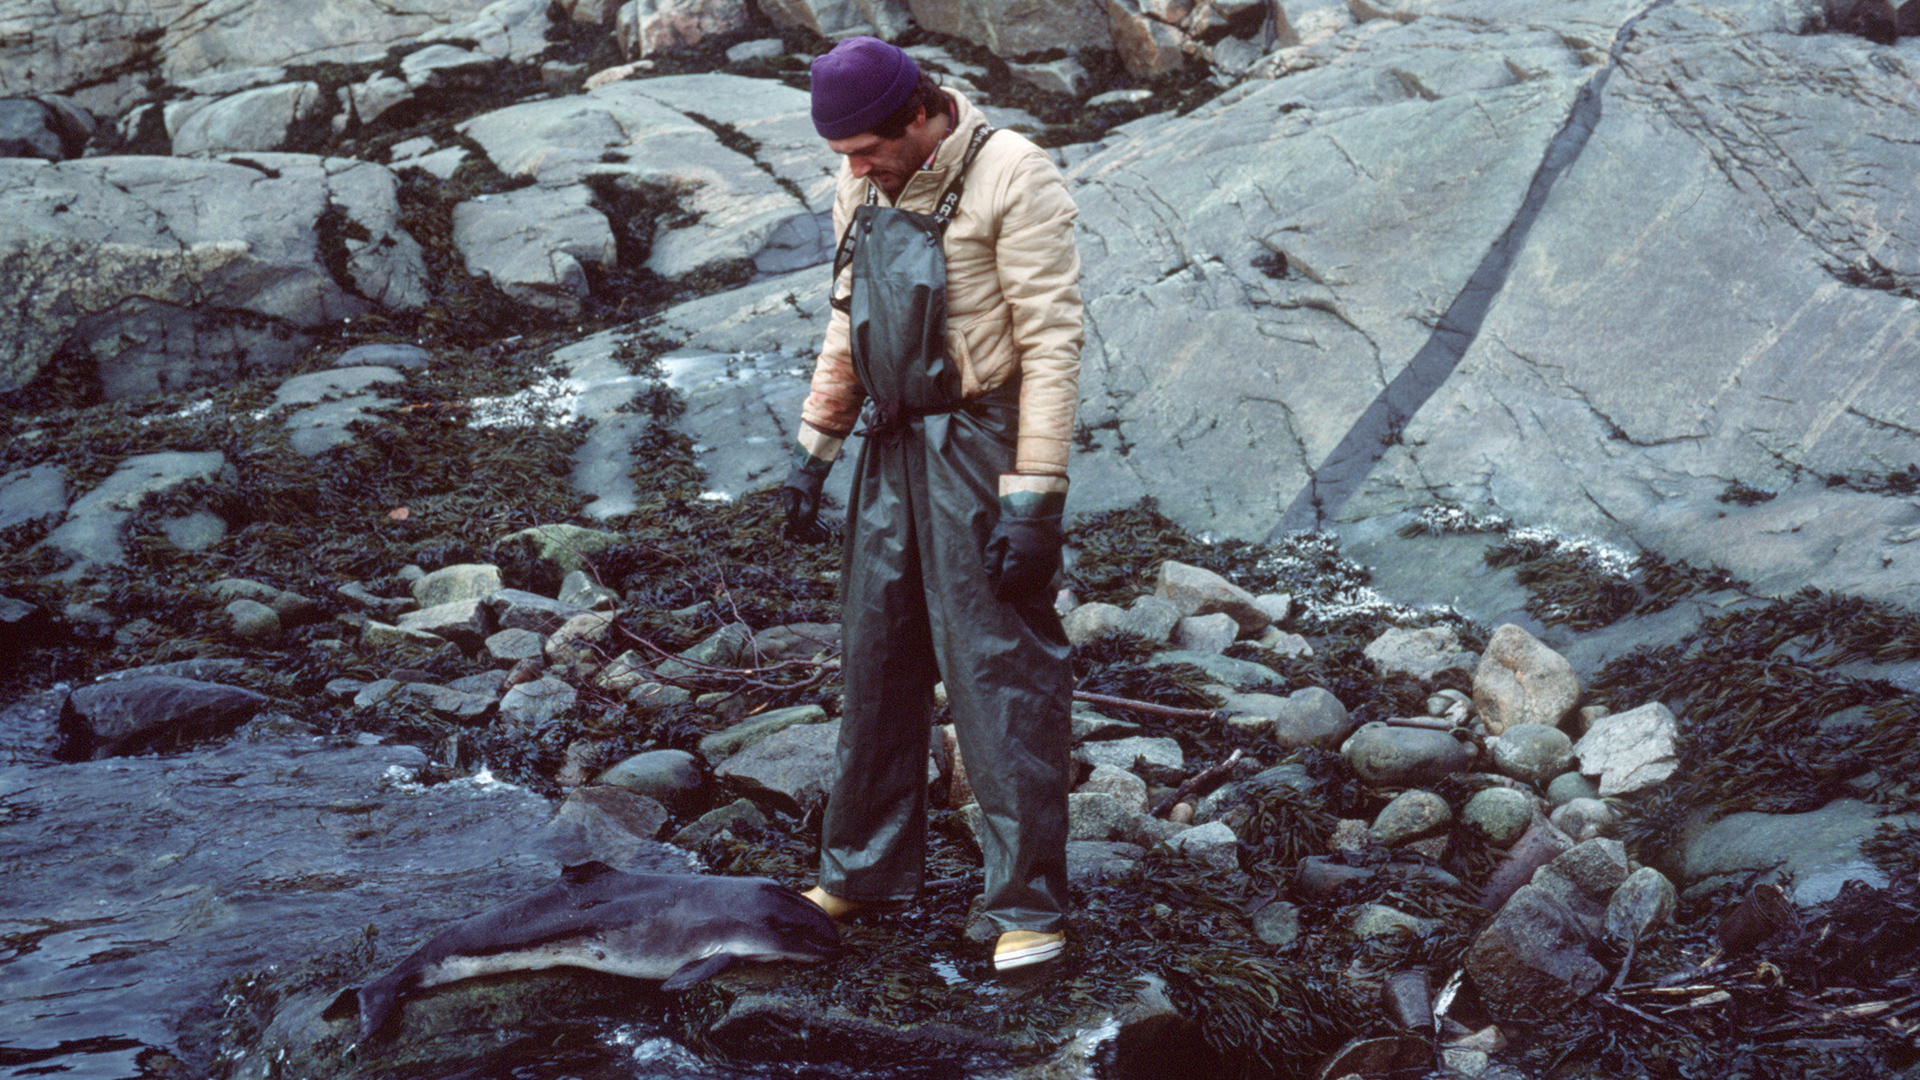 At low tide, on the rocky, seaweed-covered shore, a man in chest waders stands over the carcass of a tiny porpoise.